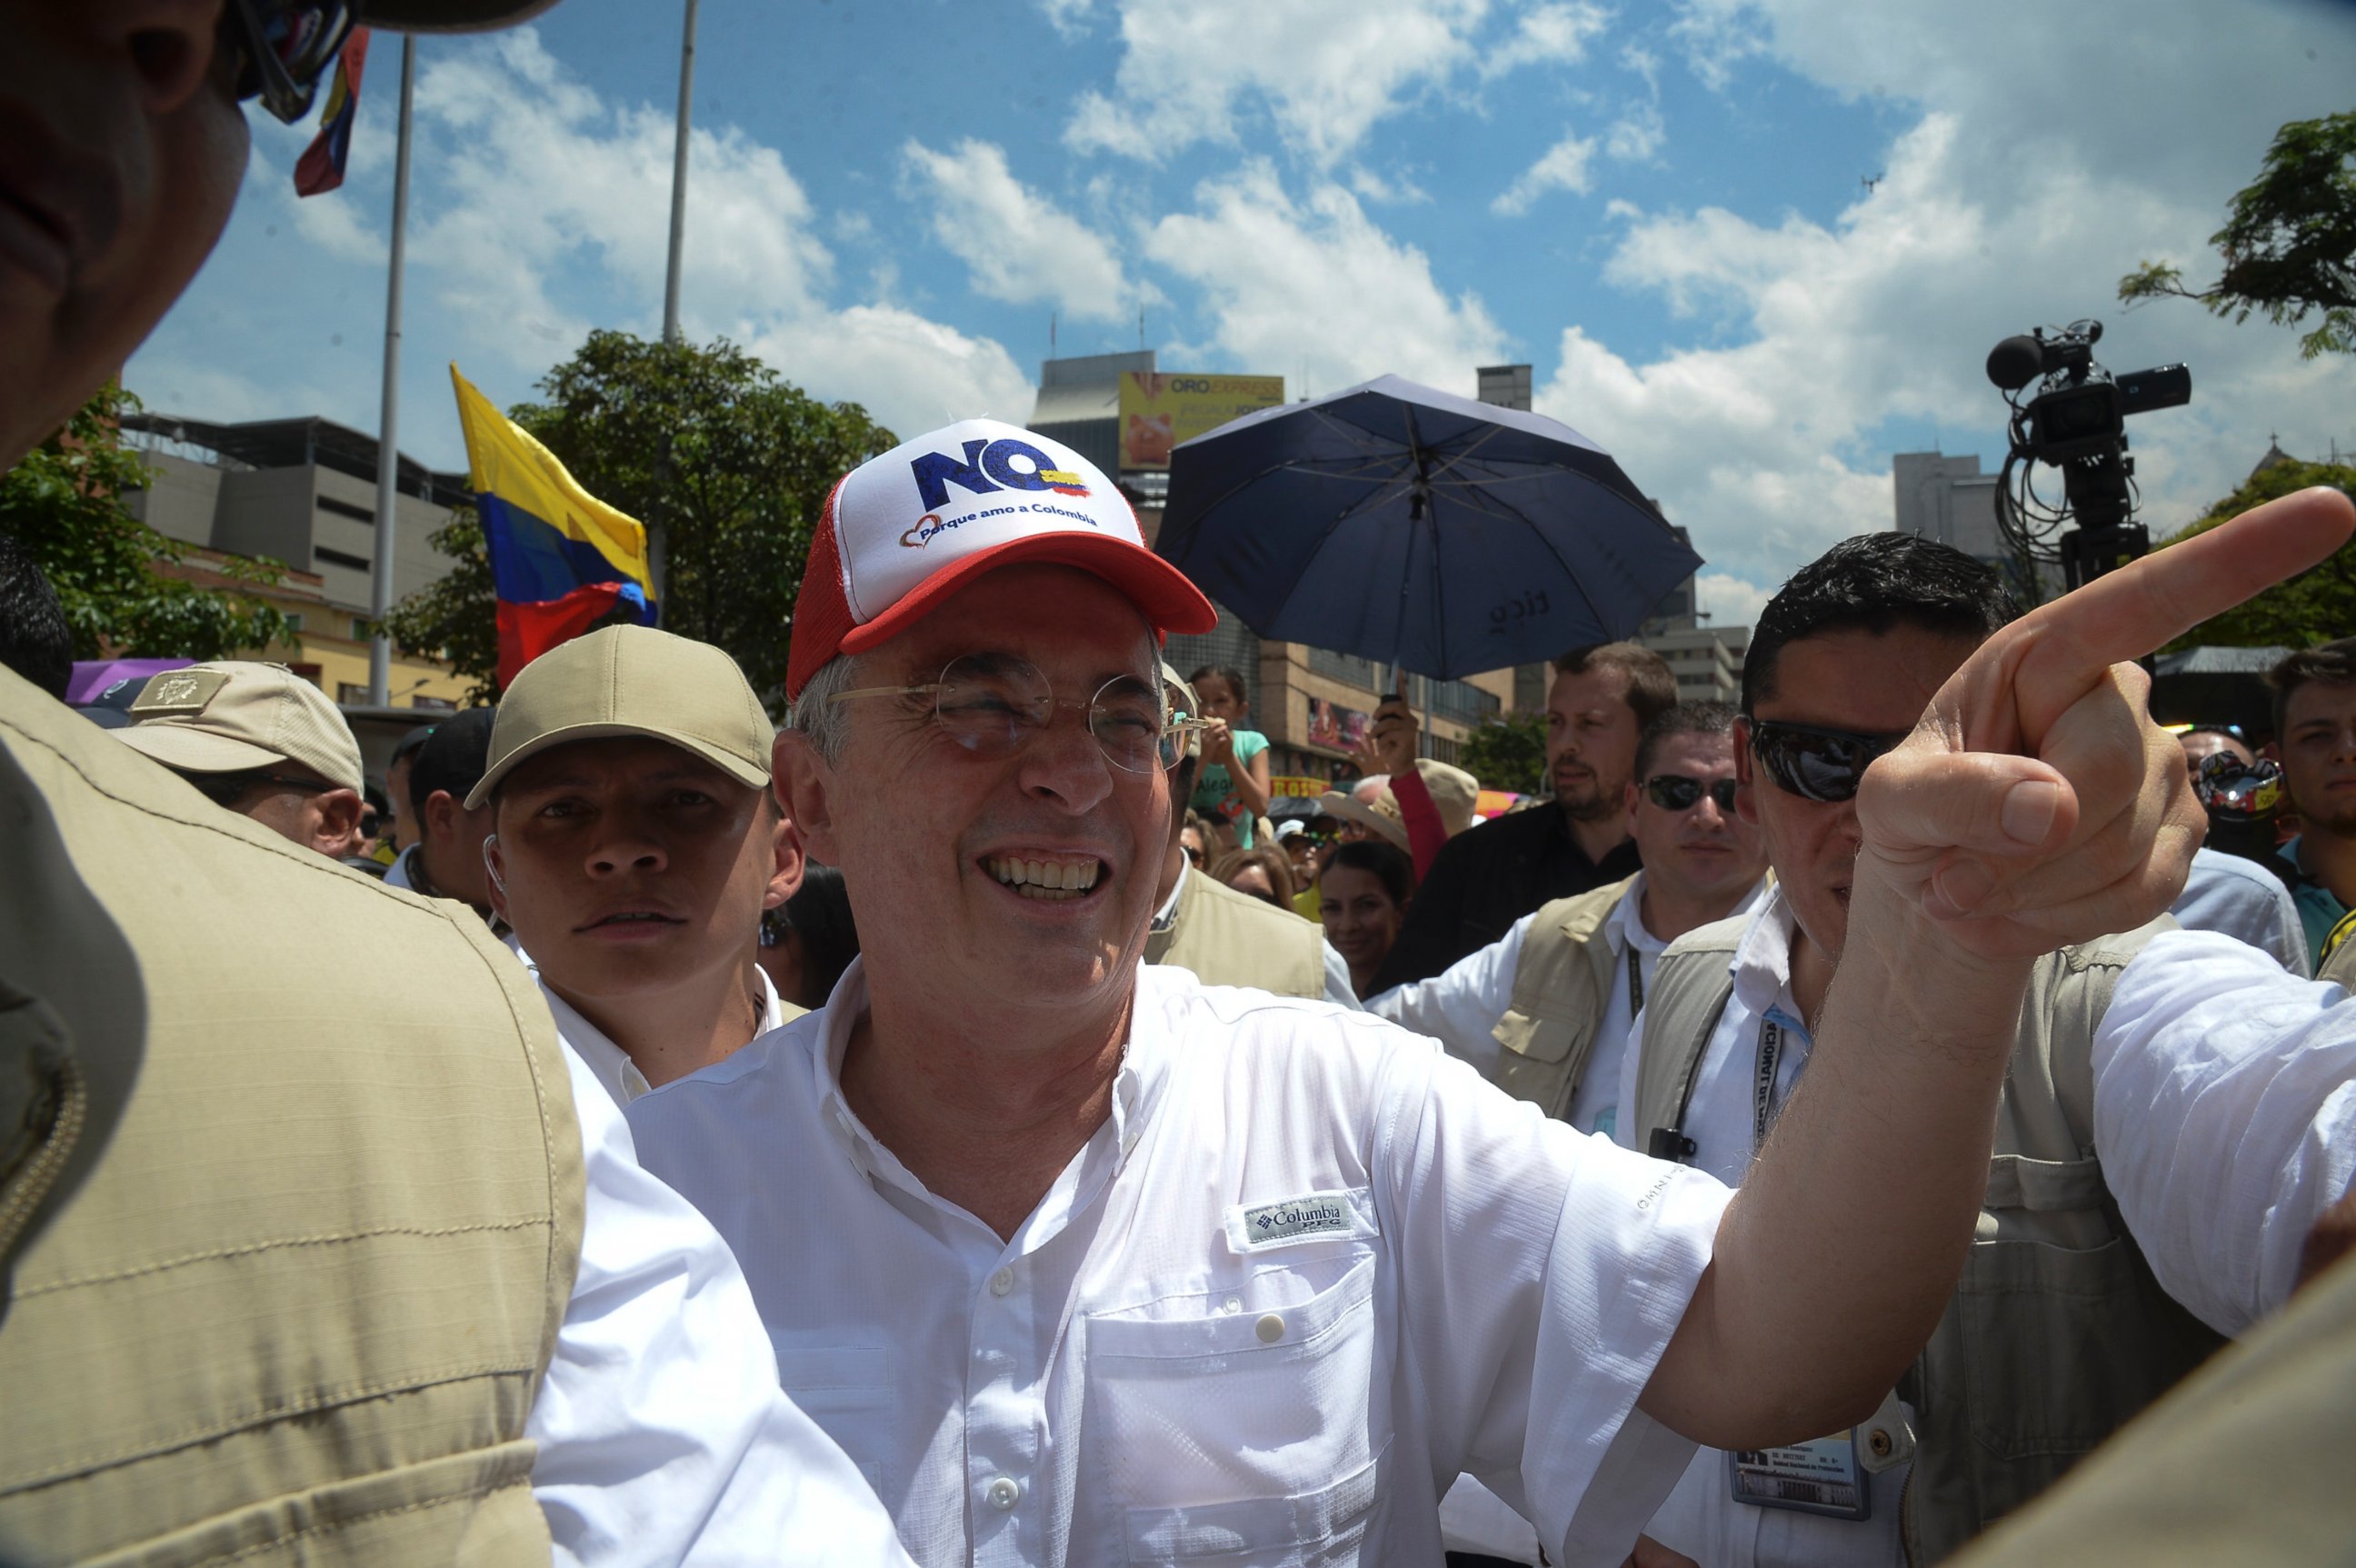 PHOTO: Former Colombian president and current senator Alvaro Uribe leads a march of his supporters against the goverment of Juan Manuel Santos and the peace agreement with the FARC rebels, in Medellin, Antioquia department, Colombia, April  1, 2017.